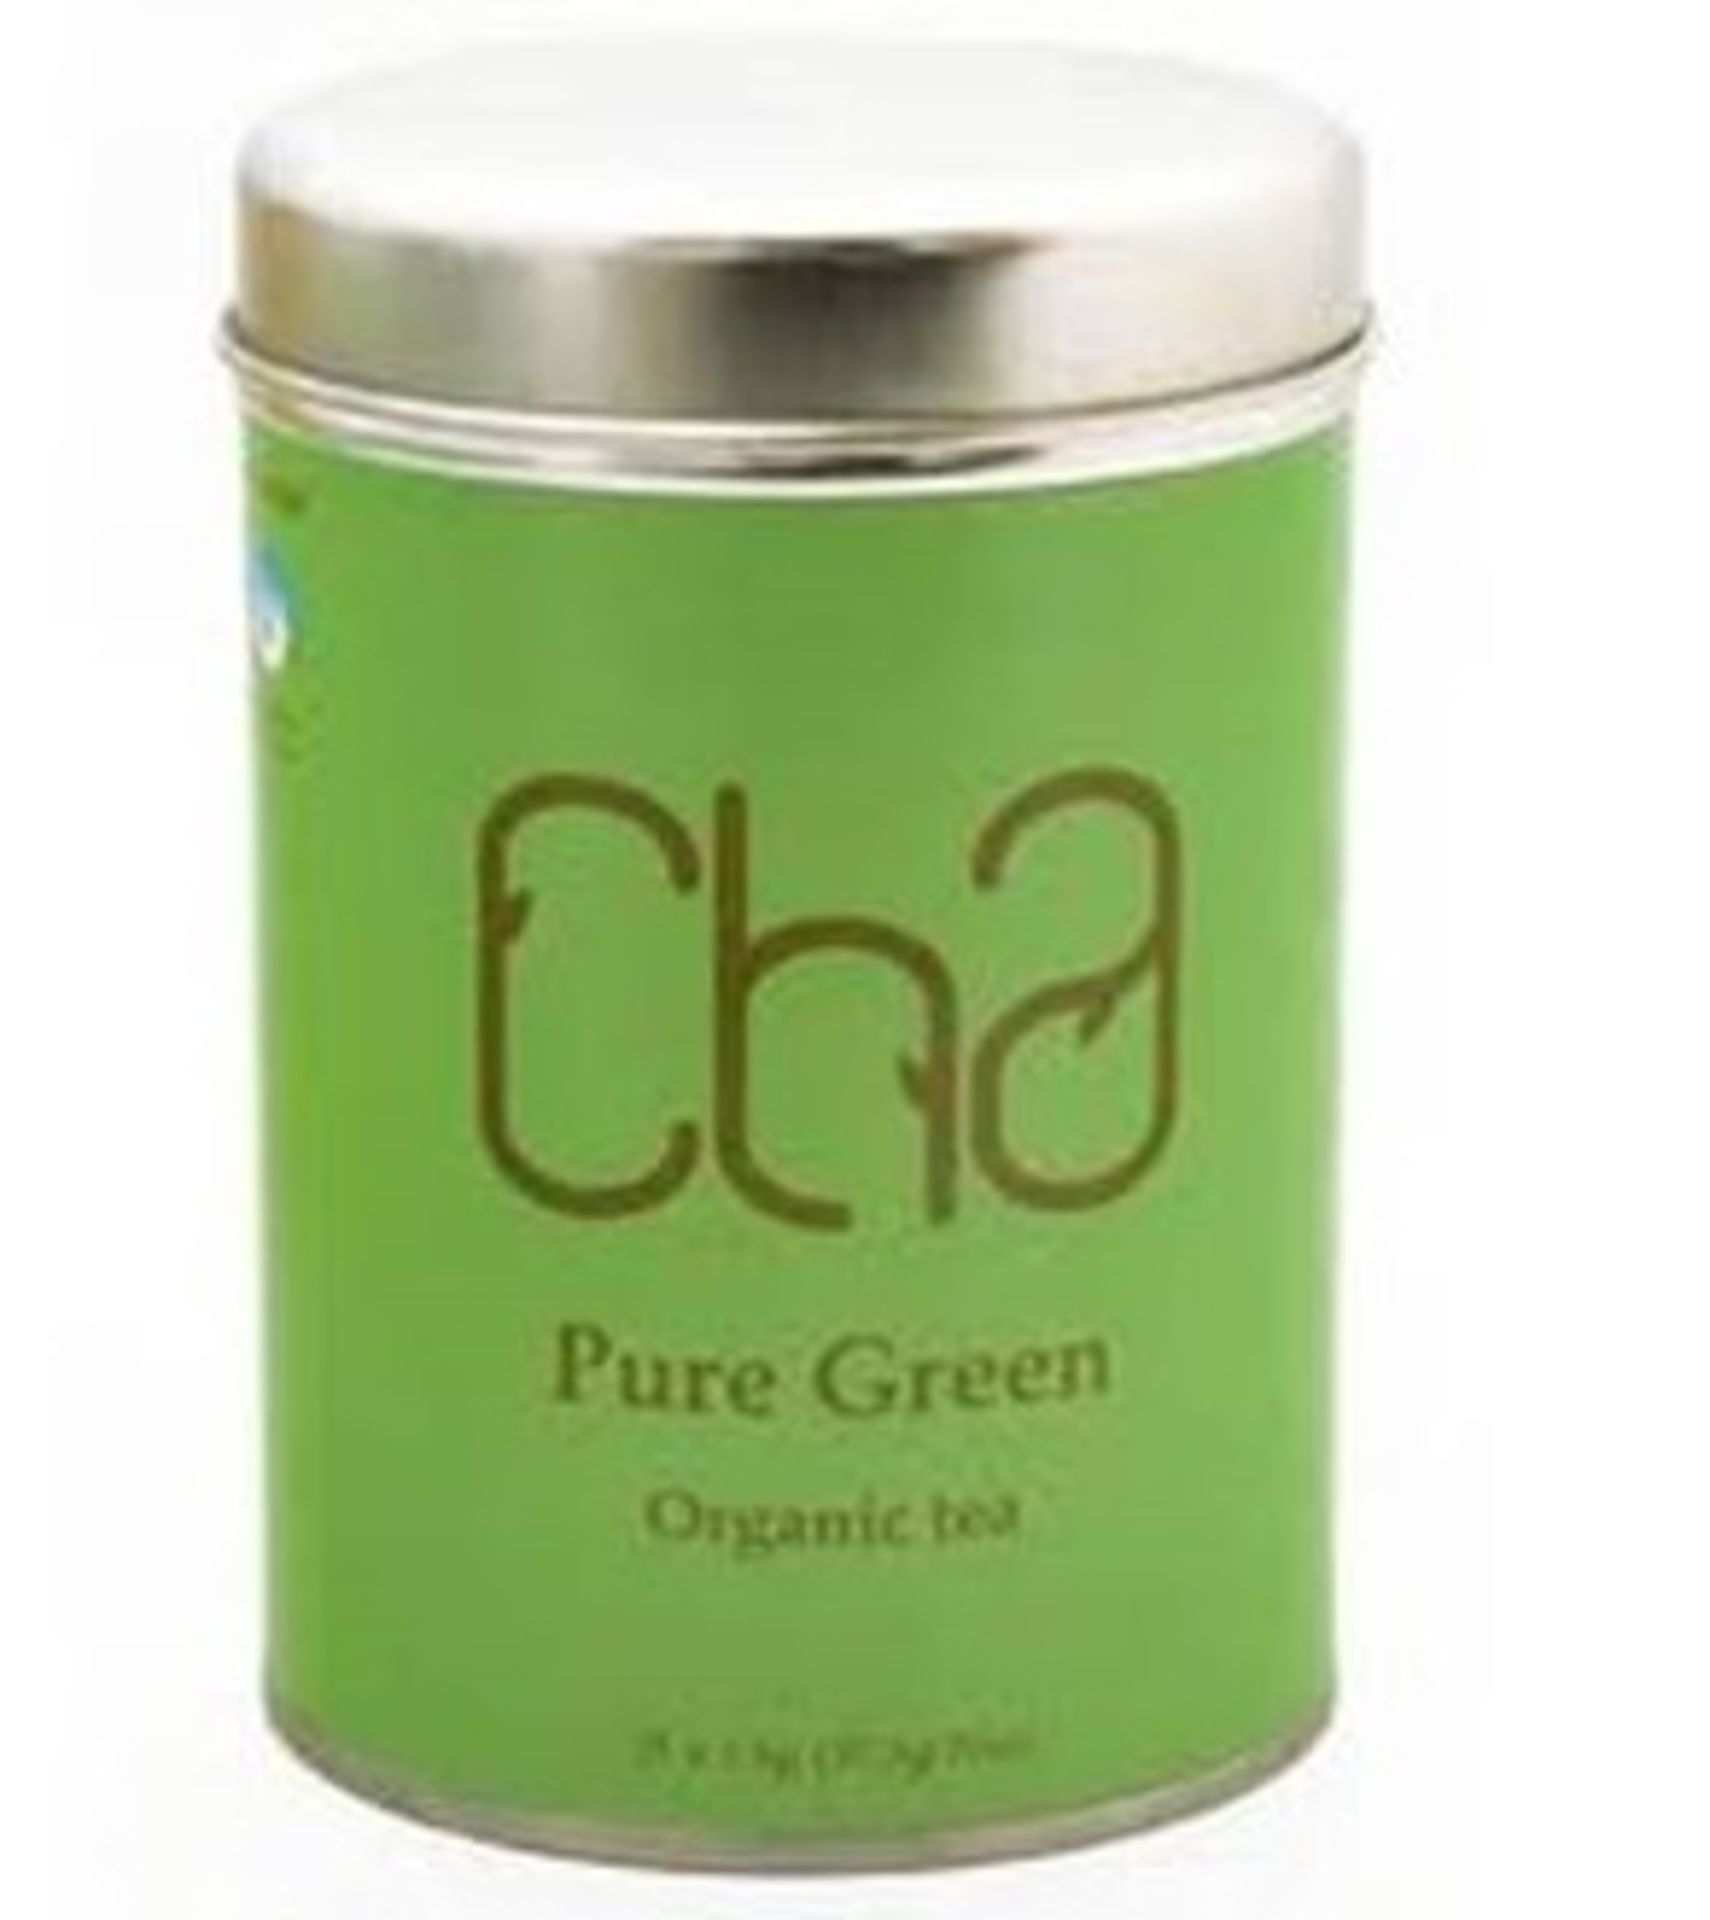 Resale Pallet - 600 x Tins of CHA Organic Tea - PURE GREEN - 100% Natural and Organic - Includes 600